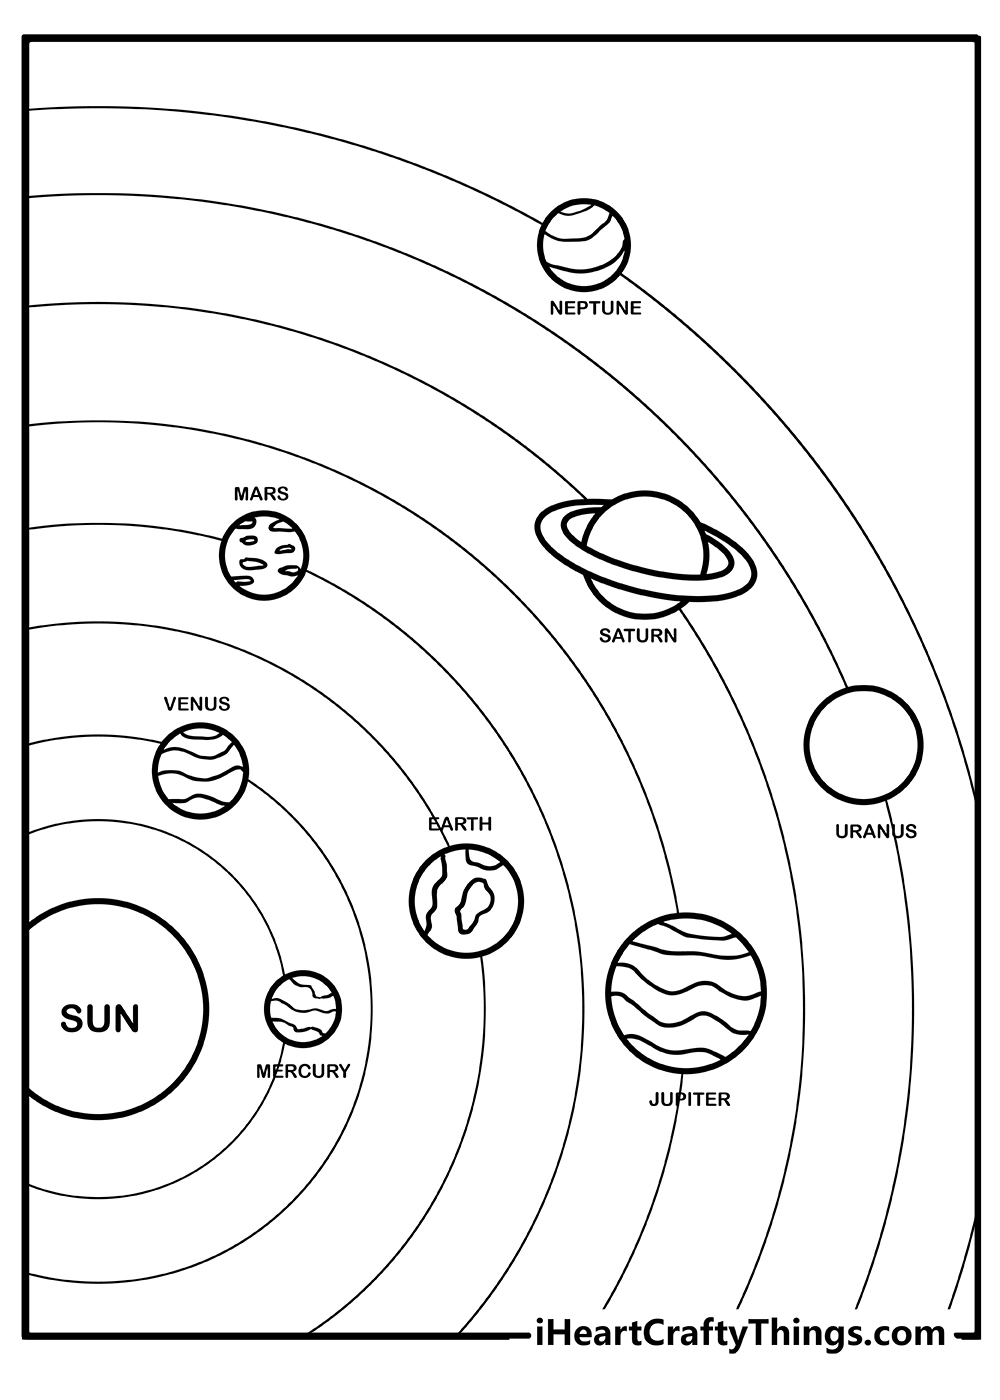 Draw solar system in chart paper and make it creative.​ - Brainly.in-anthinhphatland.vn